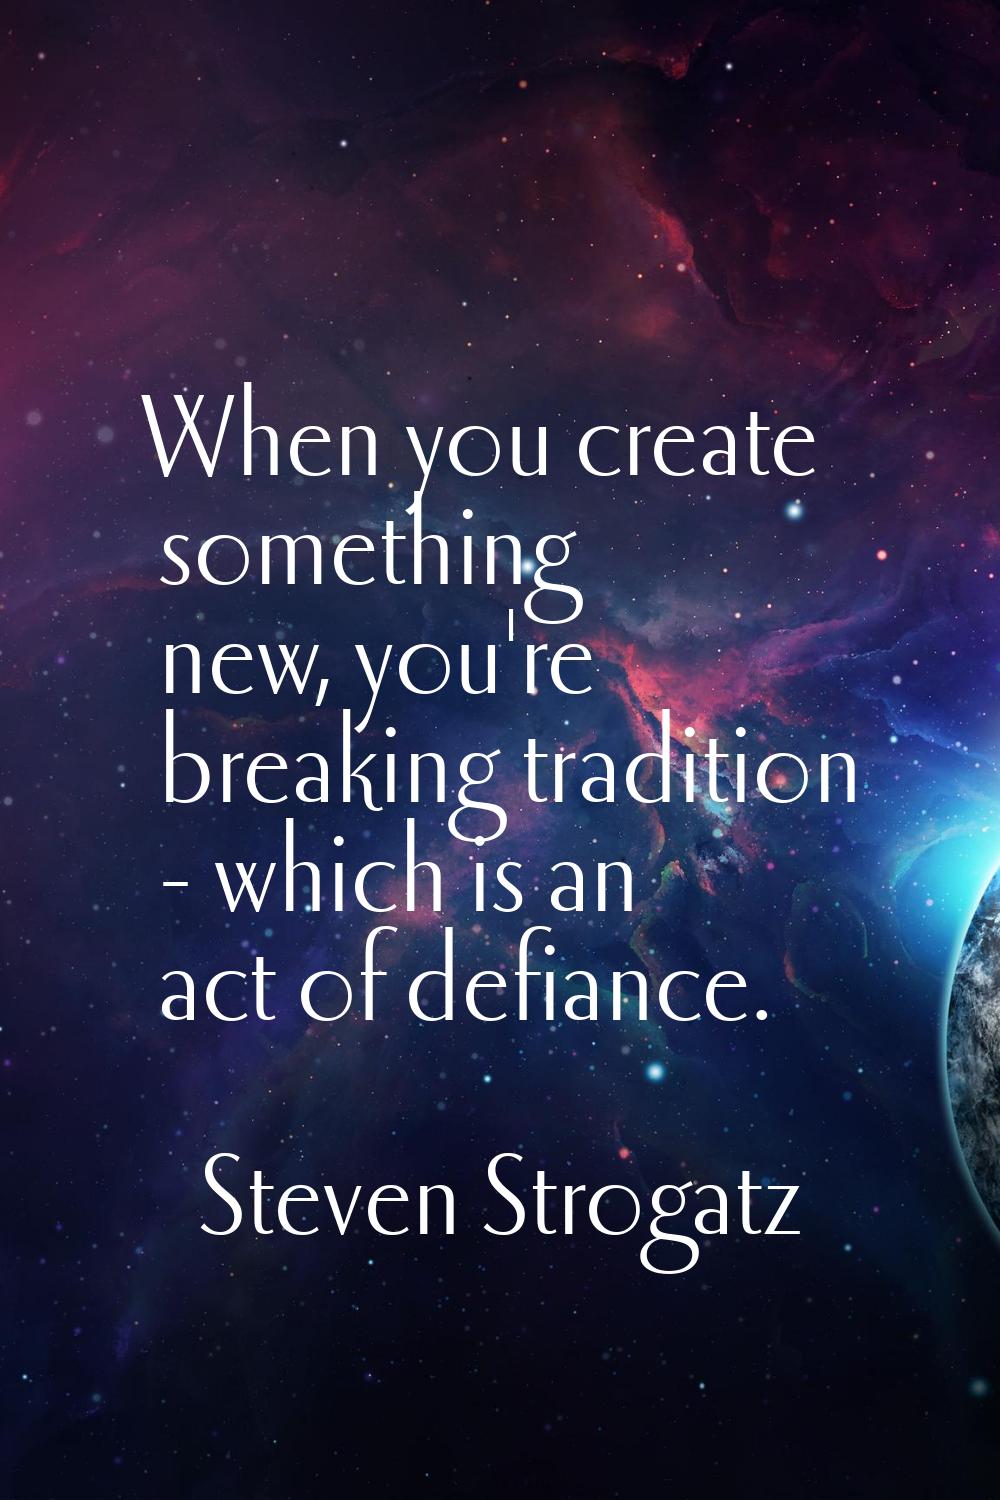 When you create something new, you're breaking tradition - which is an act of defiance.